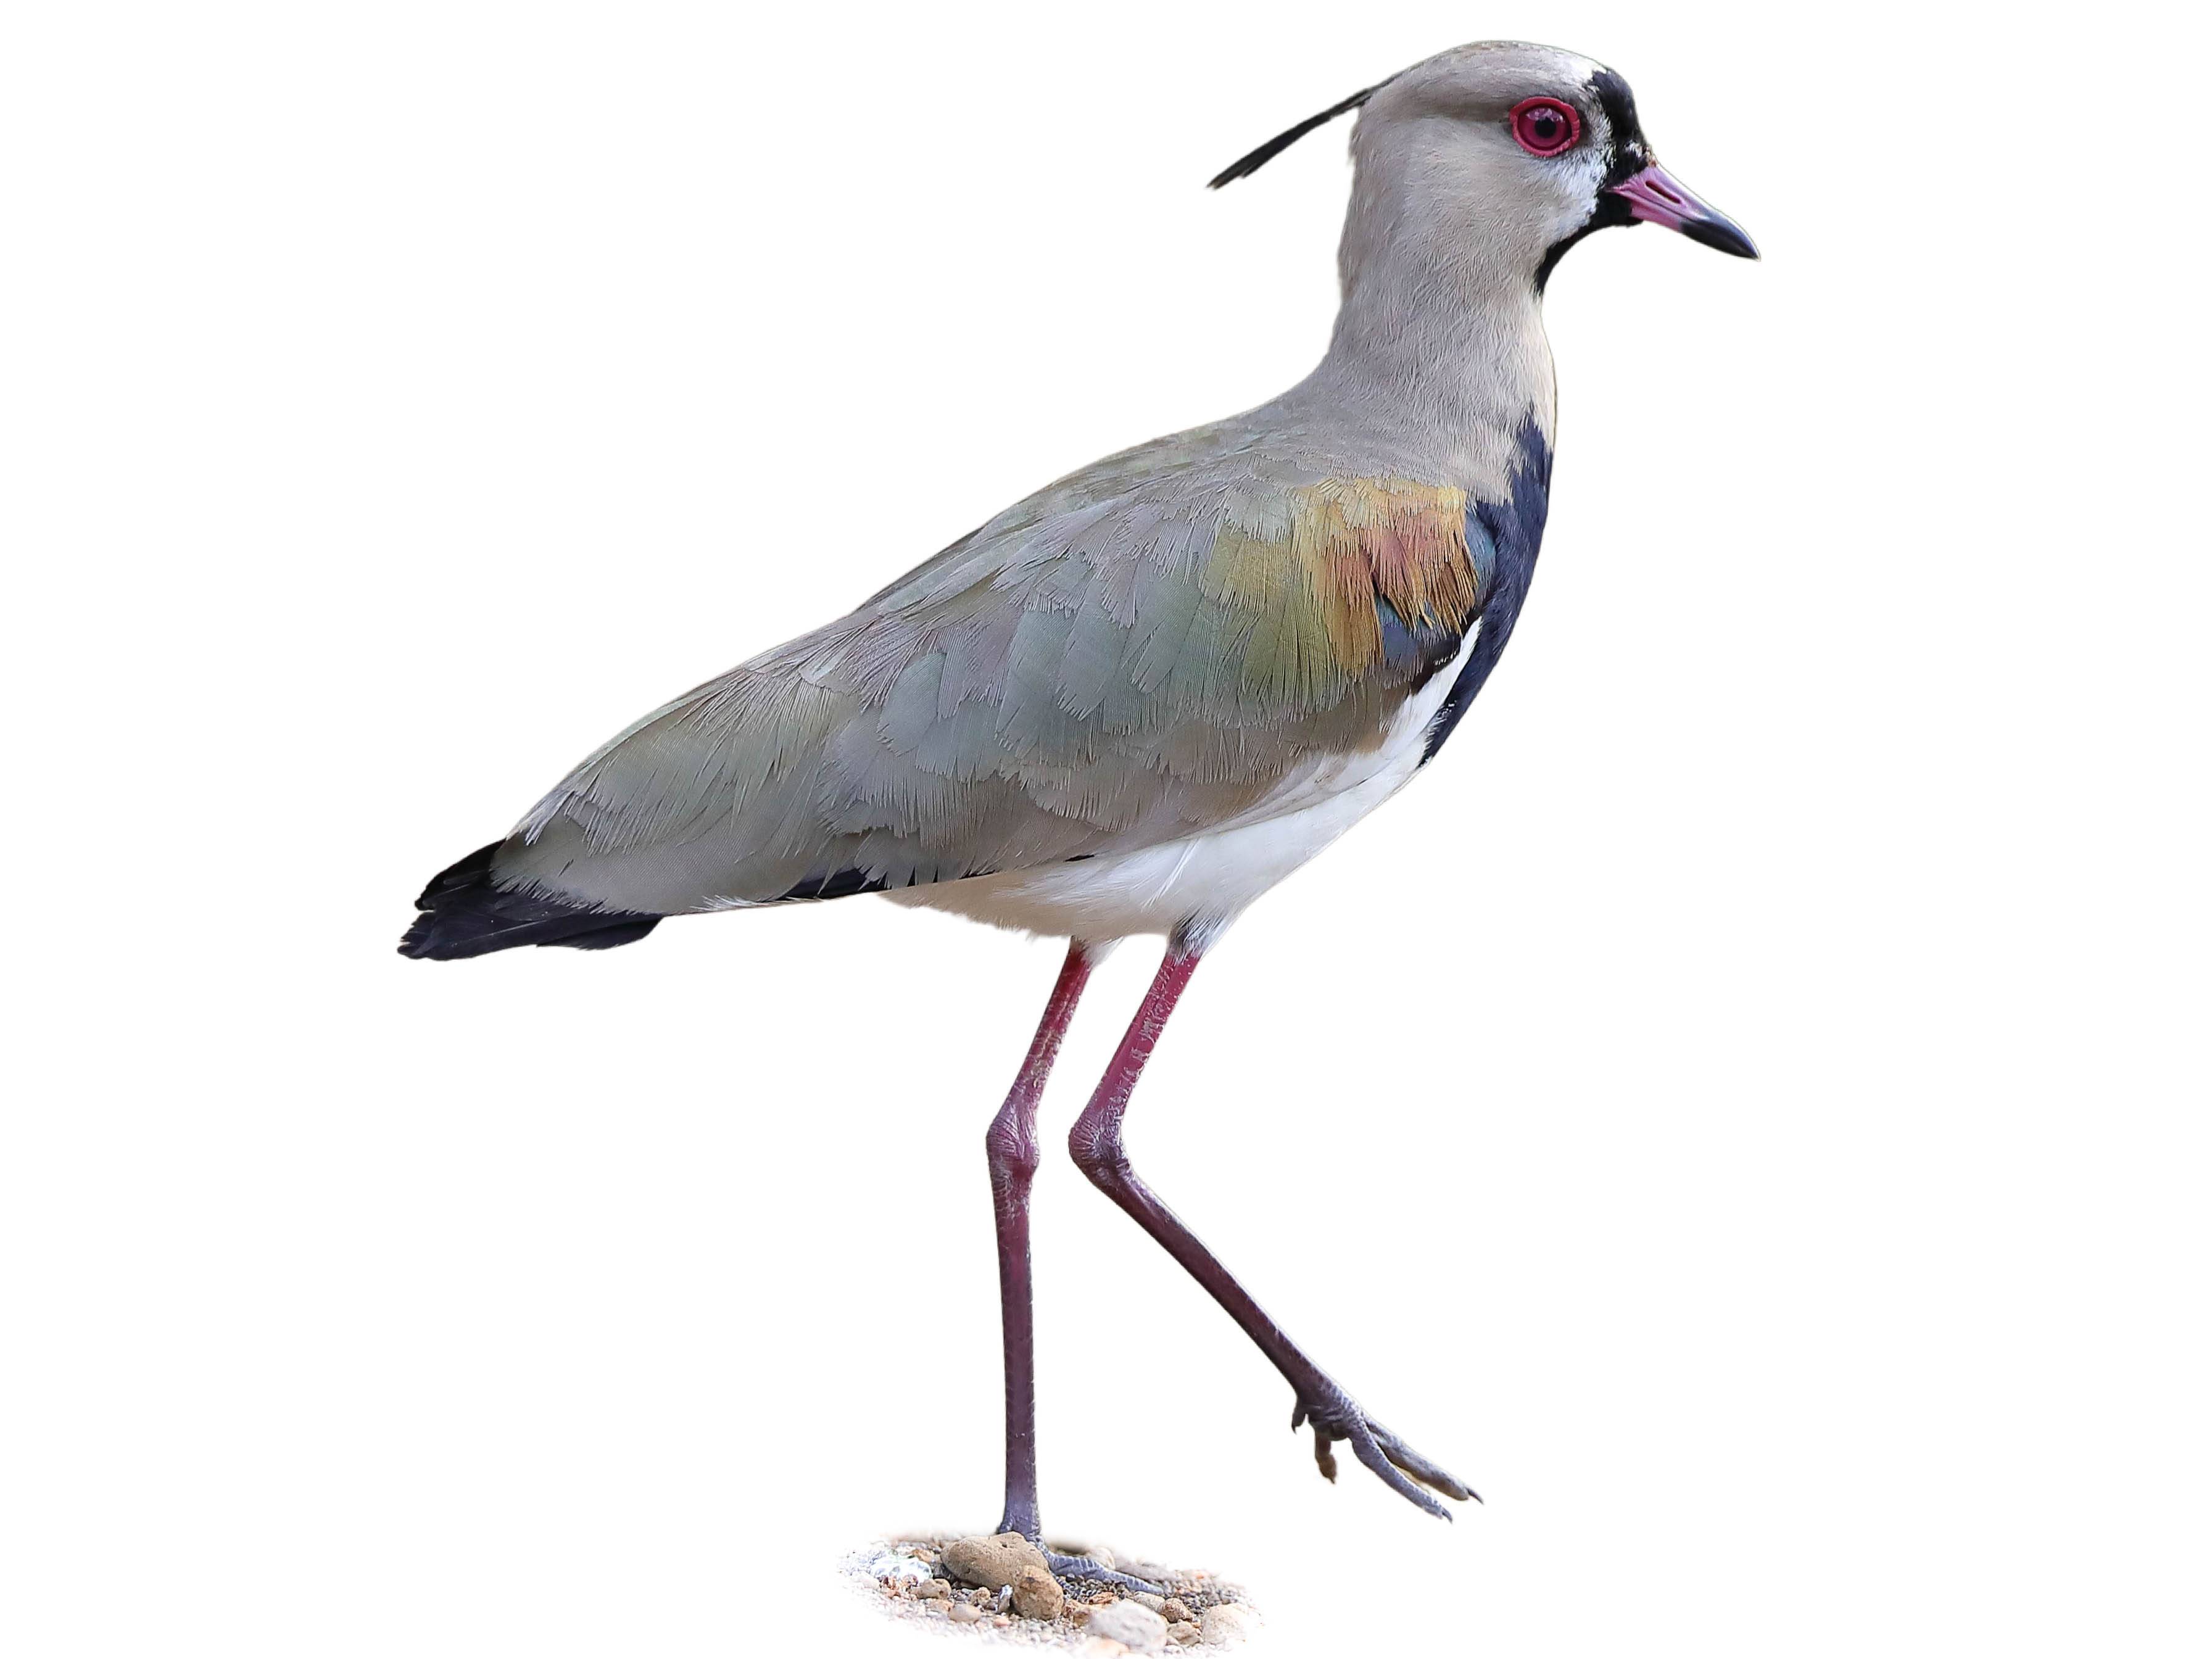 A photo of a Southern Lapwing (Vanellus chilensis)